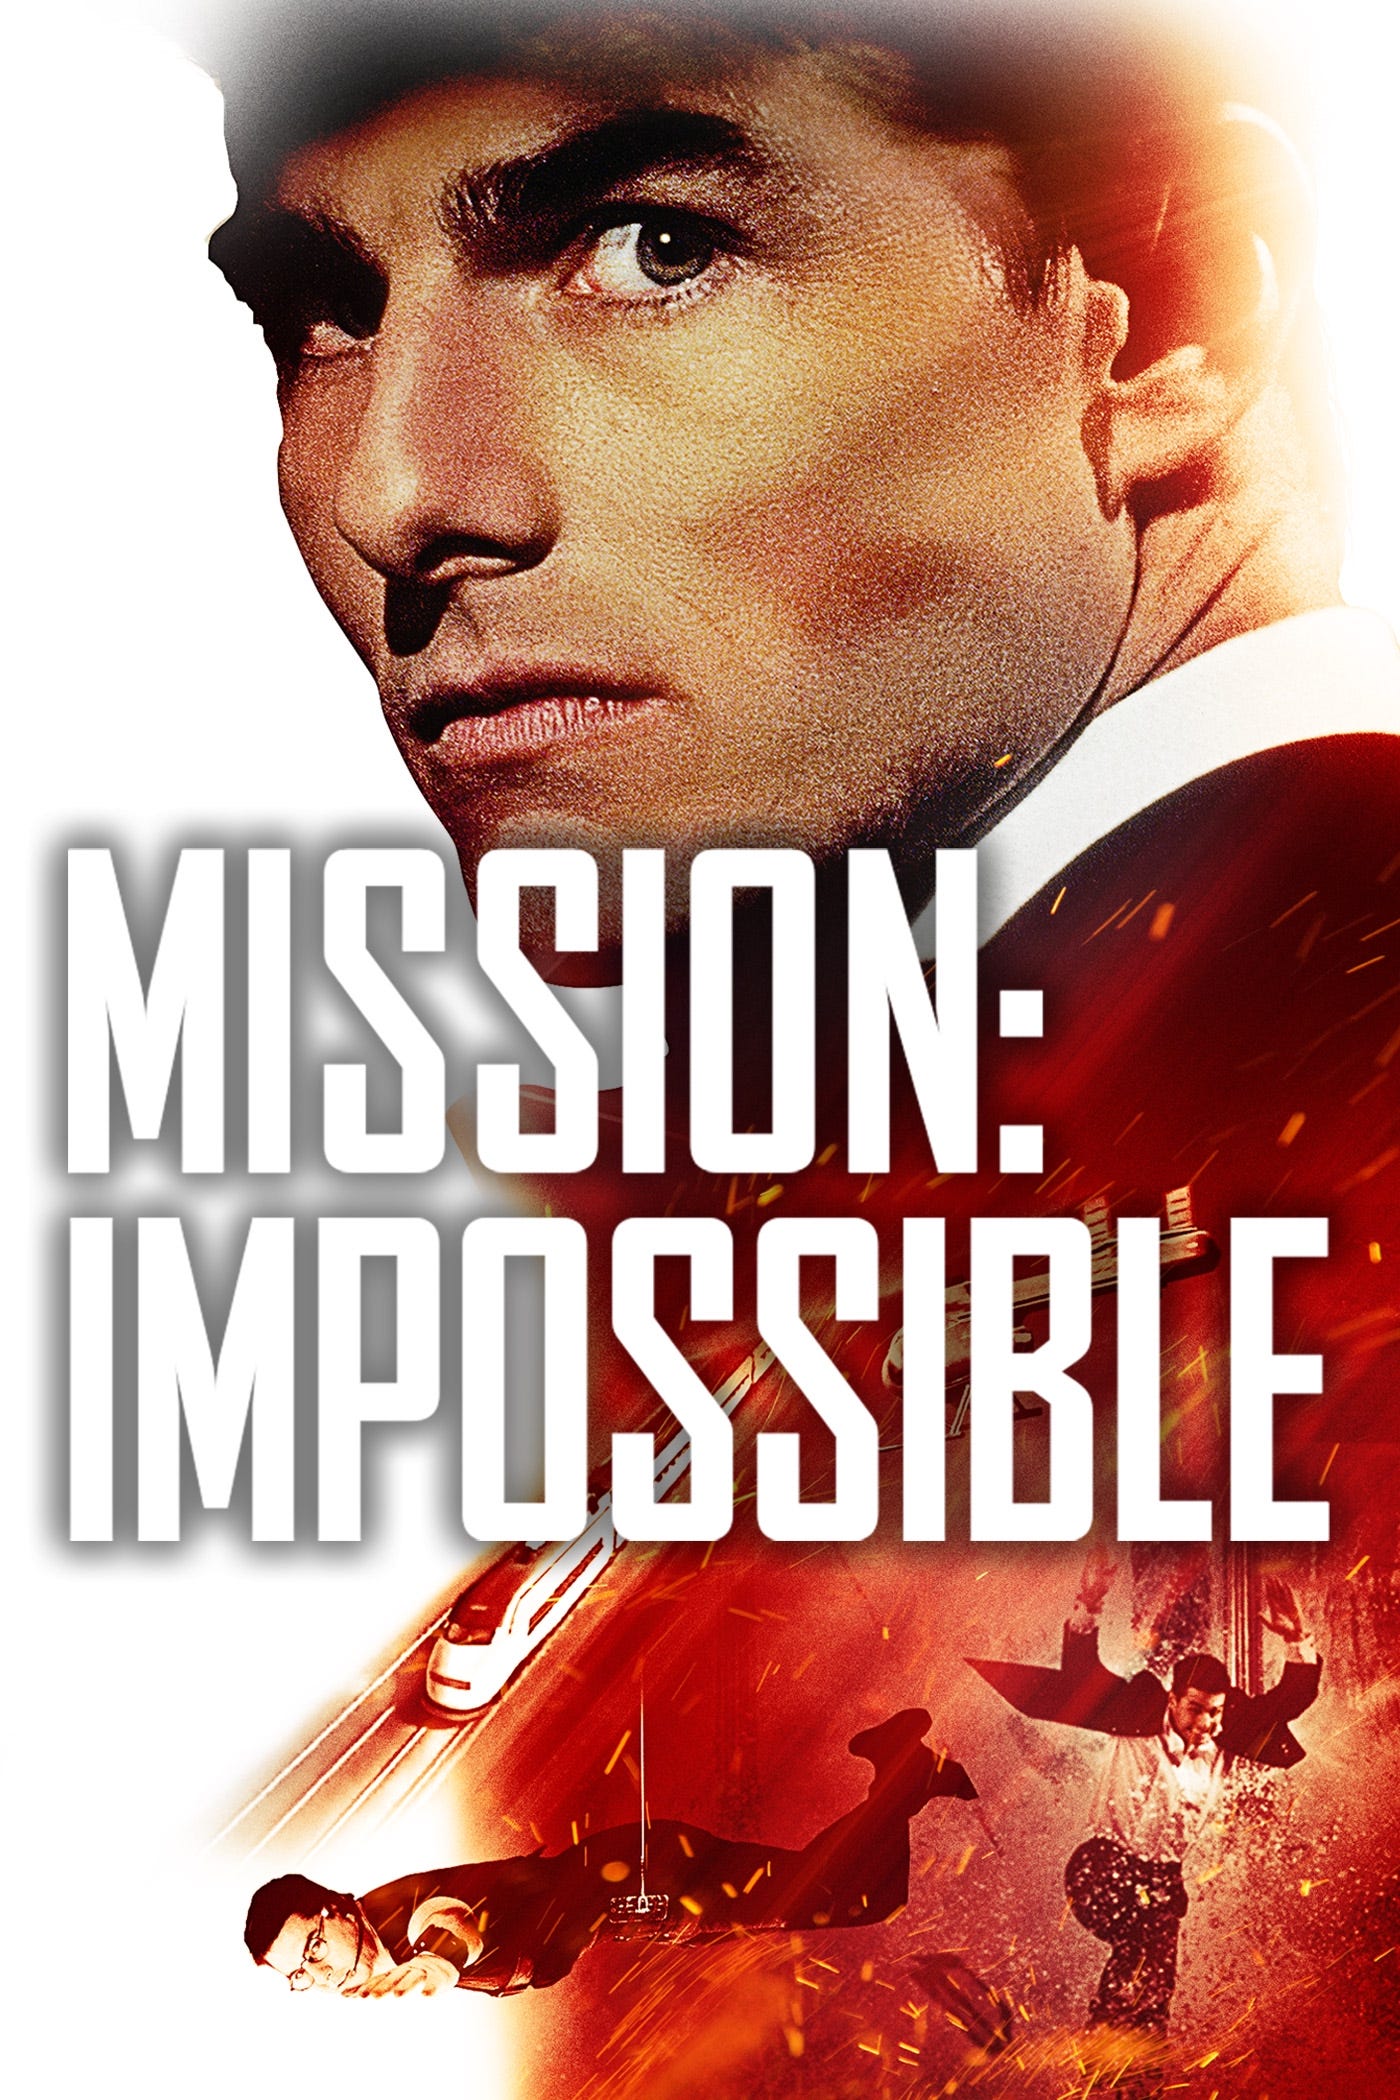 Stream Mission: Impossible Online | Download and Watch HD Movies | Stan